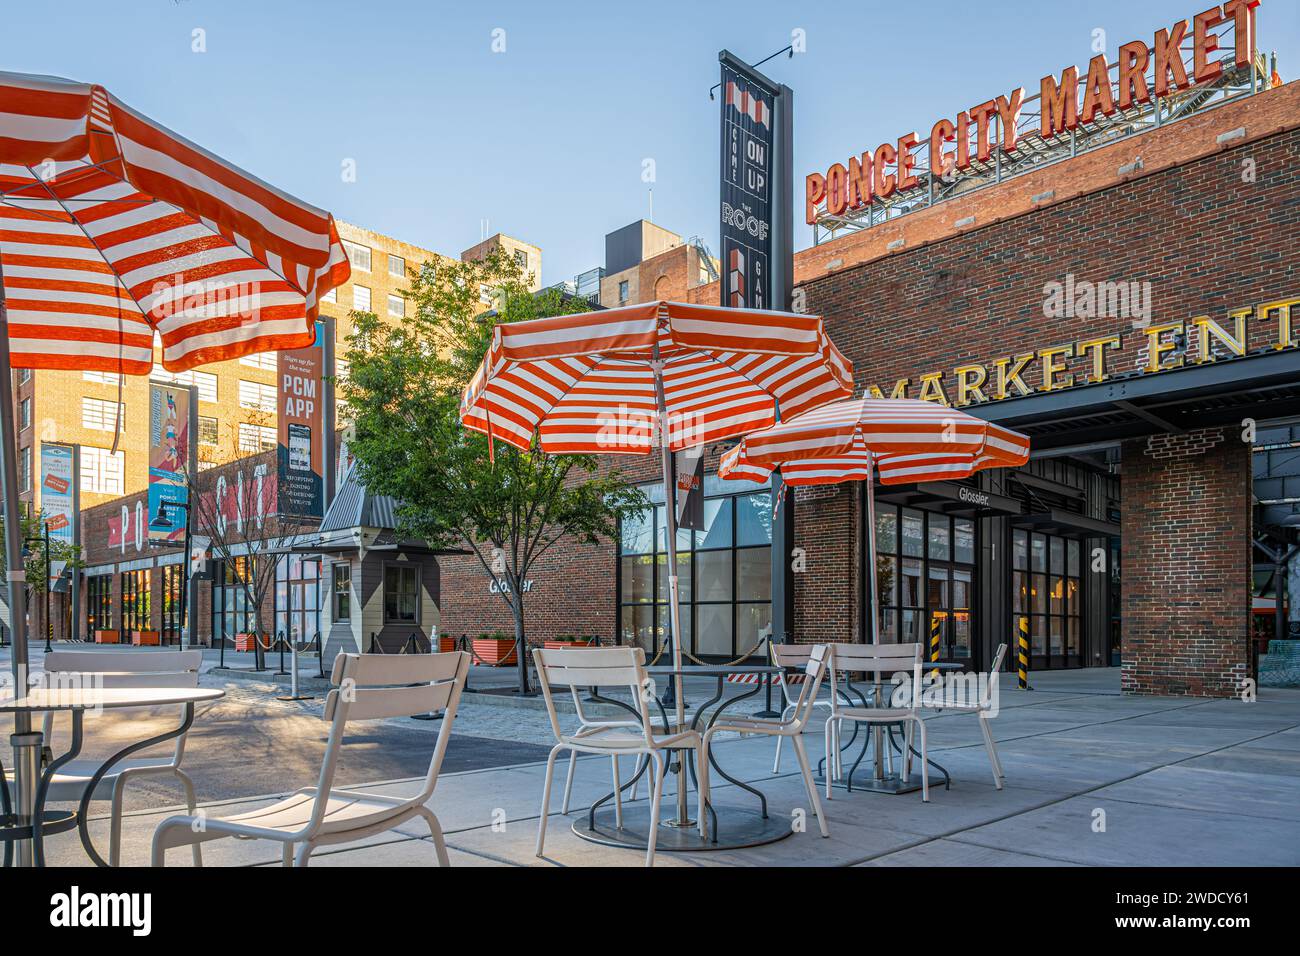 Ponce City Market in Atlanta, GA, is a popular mixed-use development featuring restaurants, retail shops, office space, and high end apartments. (USA) Stock Photo